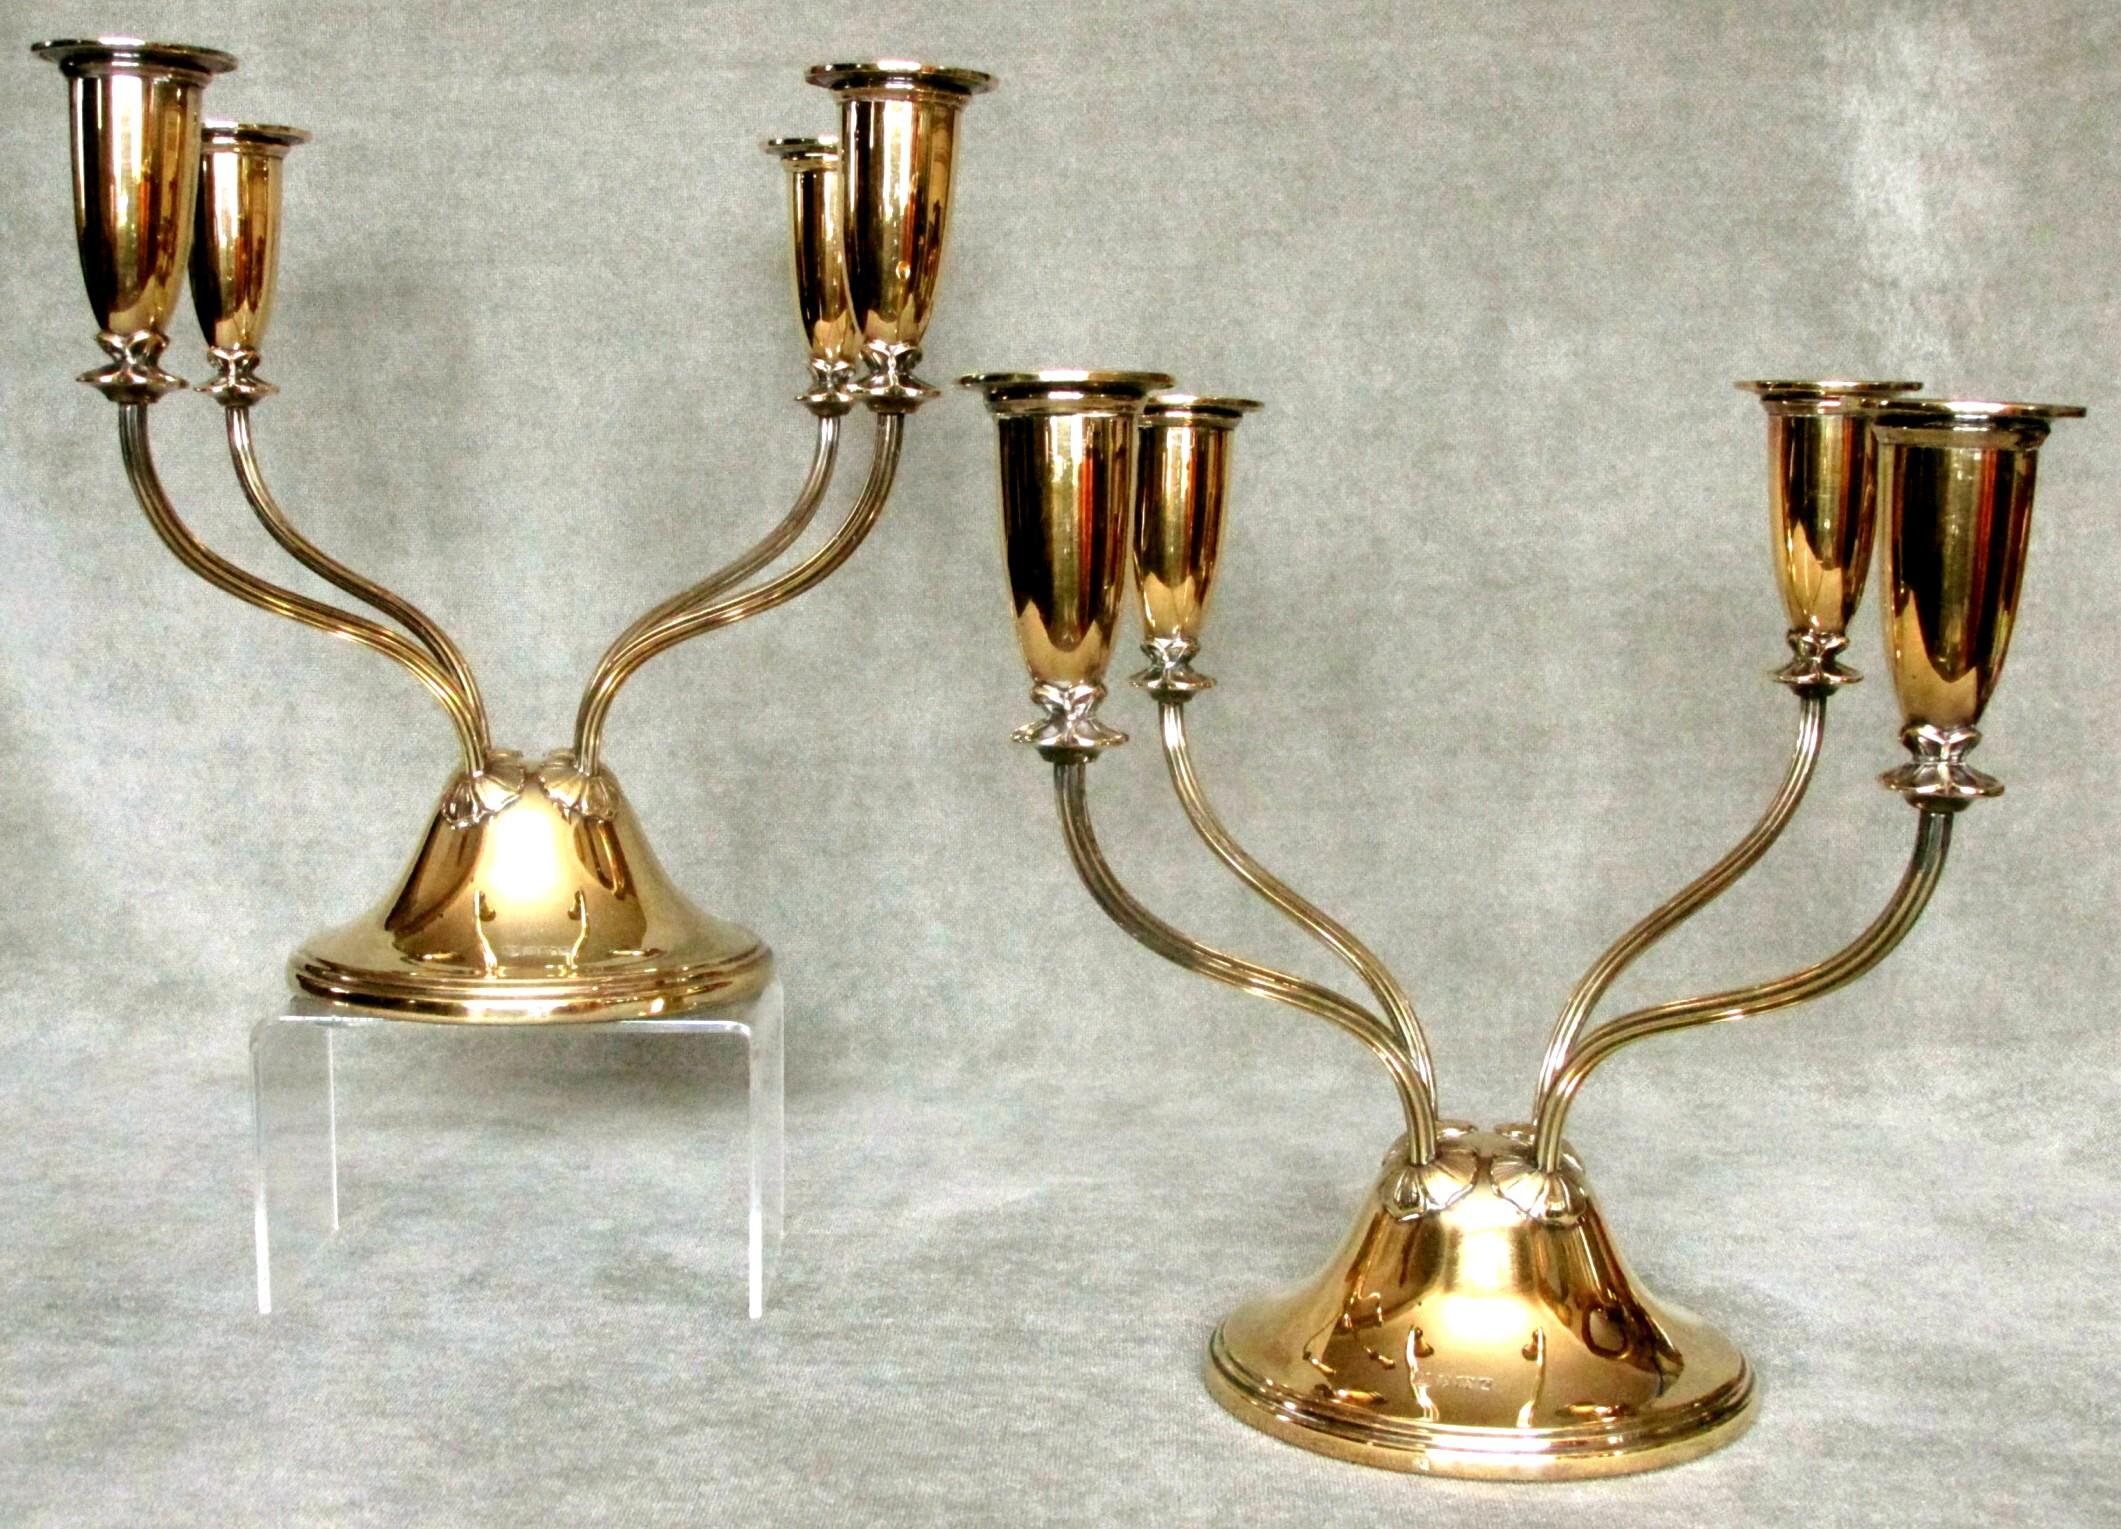 An exceptionally fine pair of gilded sterling silver candelabra, showing upswept branches with tulip shaped nozzles radiating from domed weighted bases. Both exhibiting a lustrous gold finish and bearing impressed hallmarks for Birmingham 1960